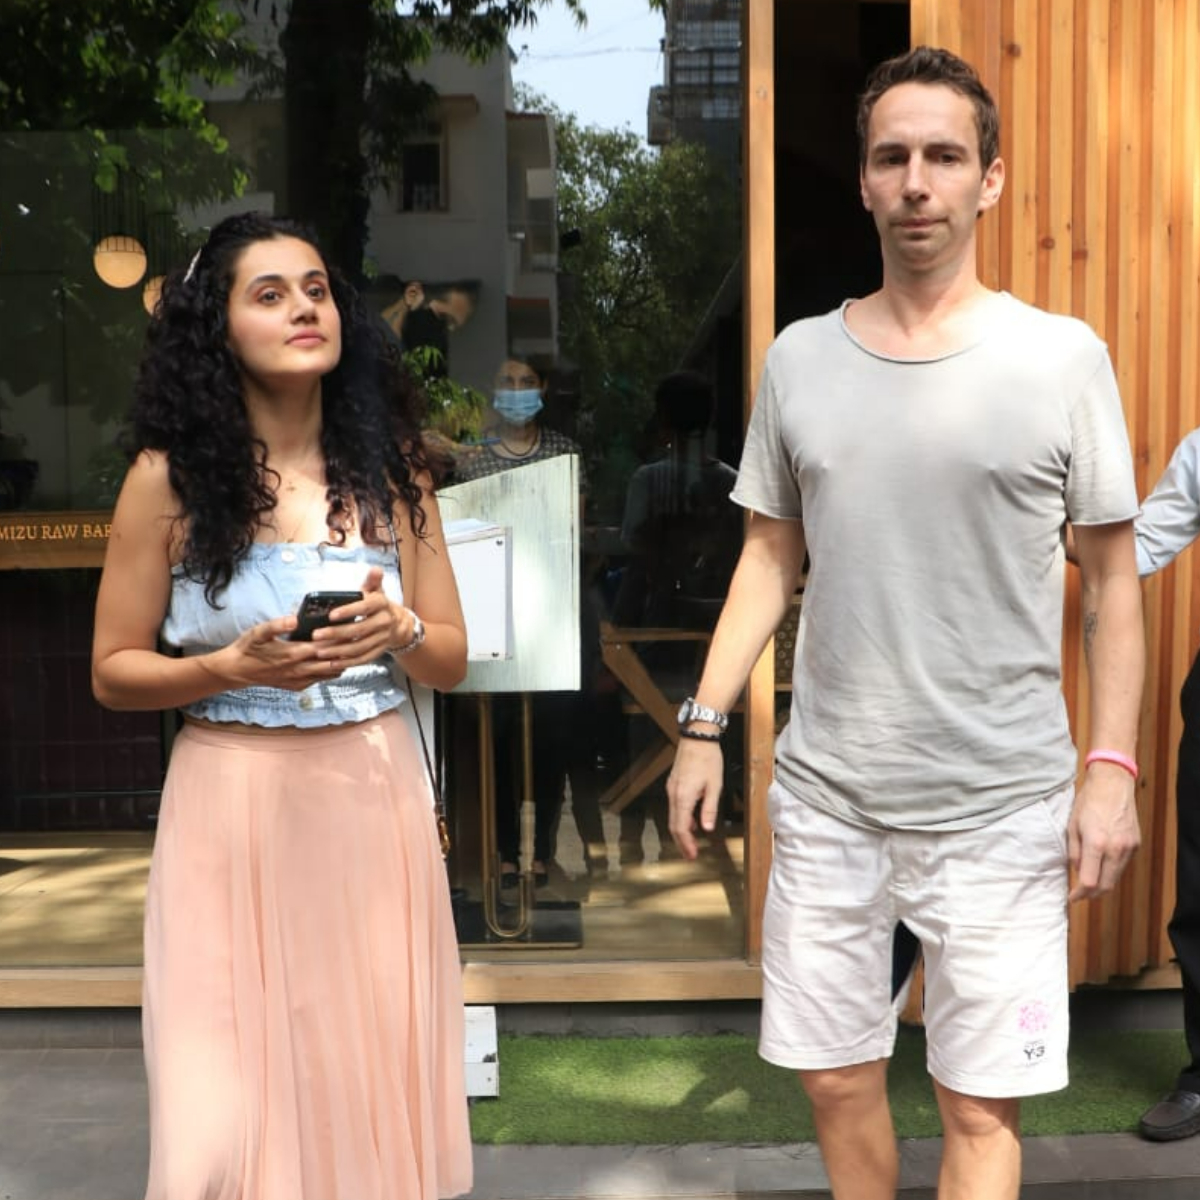 PICS: Taapsee Pannu and boyfriend Mathias Boe make a rare appearance together as they get snapped in city